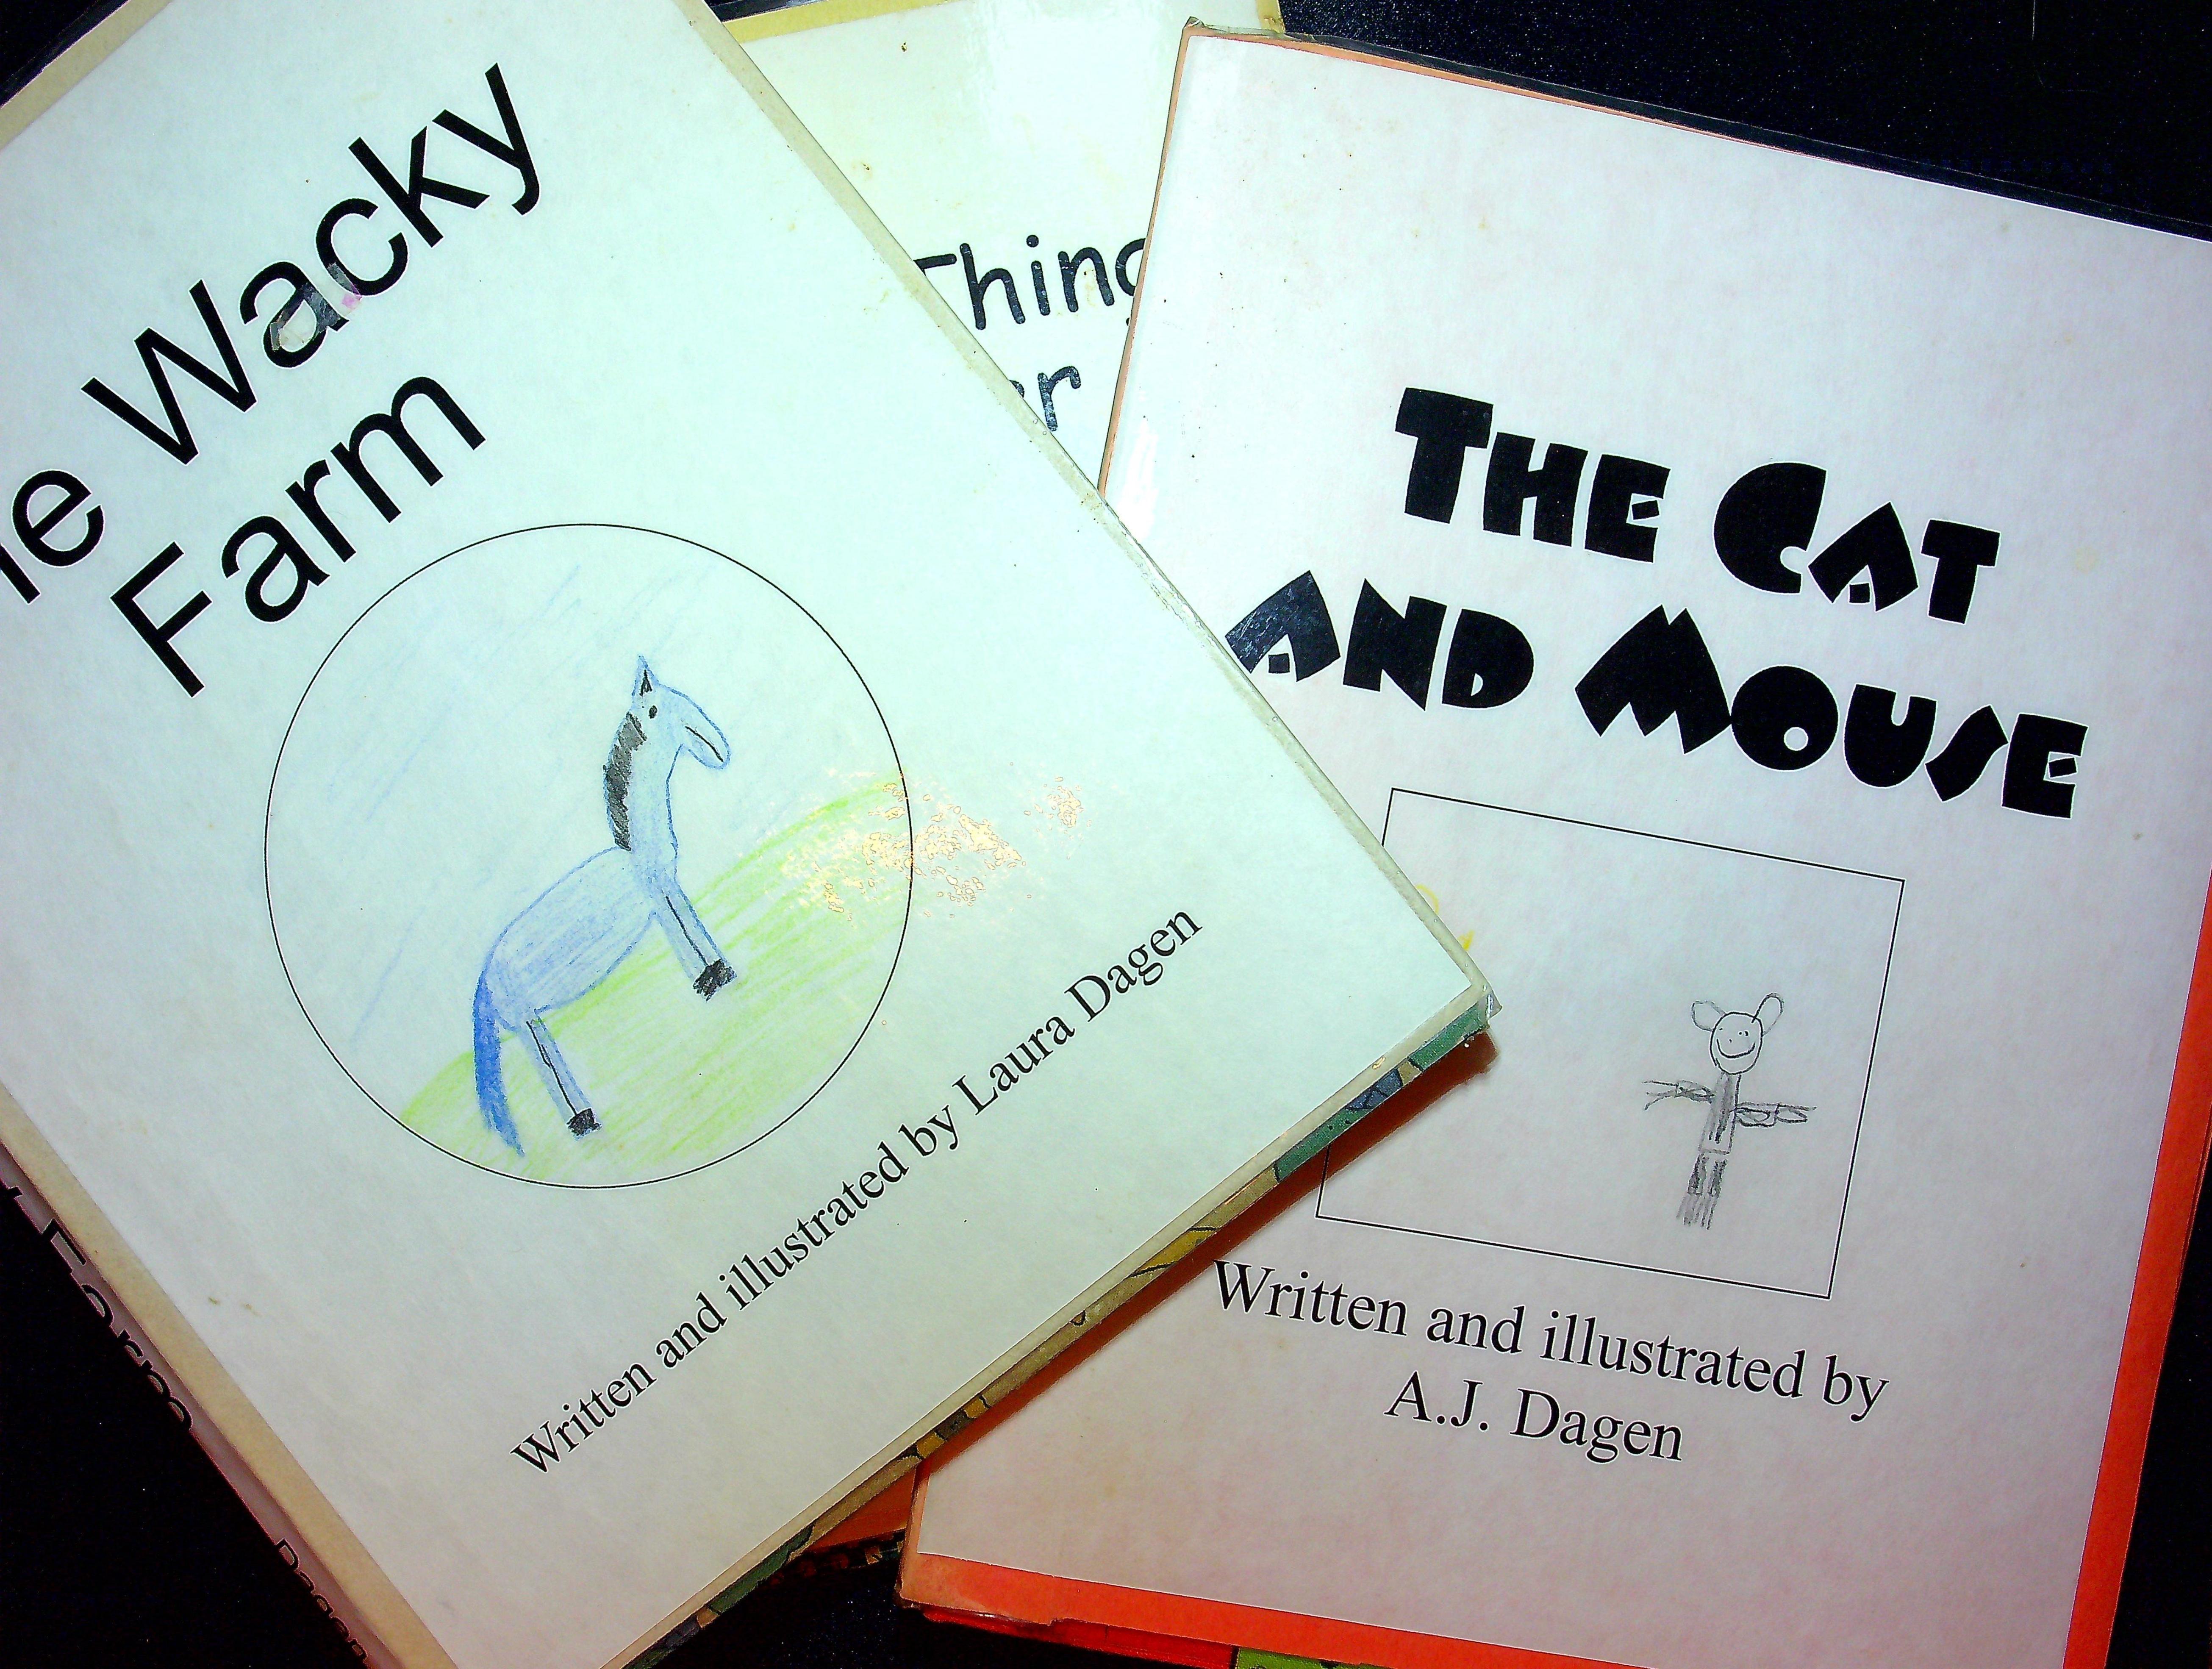 Three books written and illustrated by the Dagens back in 1998. The Wacky Farm by Laura Dagen, The Cat and Mouse by A.J. Dagen, and The Funny Thing About Laser Surgery by Sara Dagen.